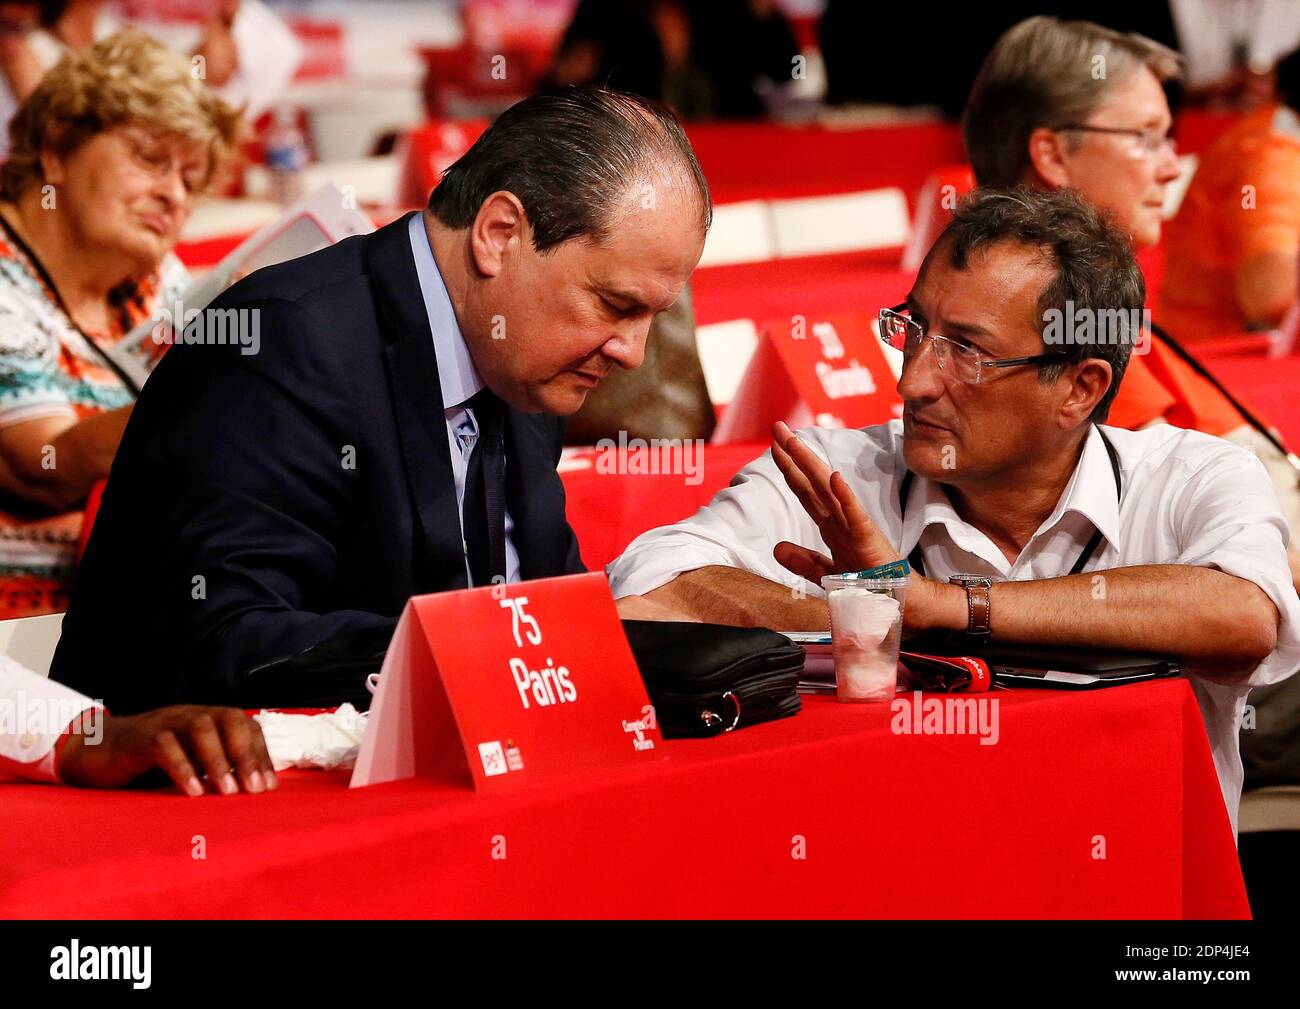 Jean-Christophe Cambadelis and Francois Lamy attending the 77th French  Socialist Party National Congress in Poitiers, France on June 5, 2015.  Socialist party delegates and congressmen attend a three-day congress to  forge a